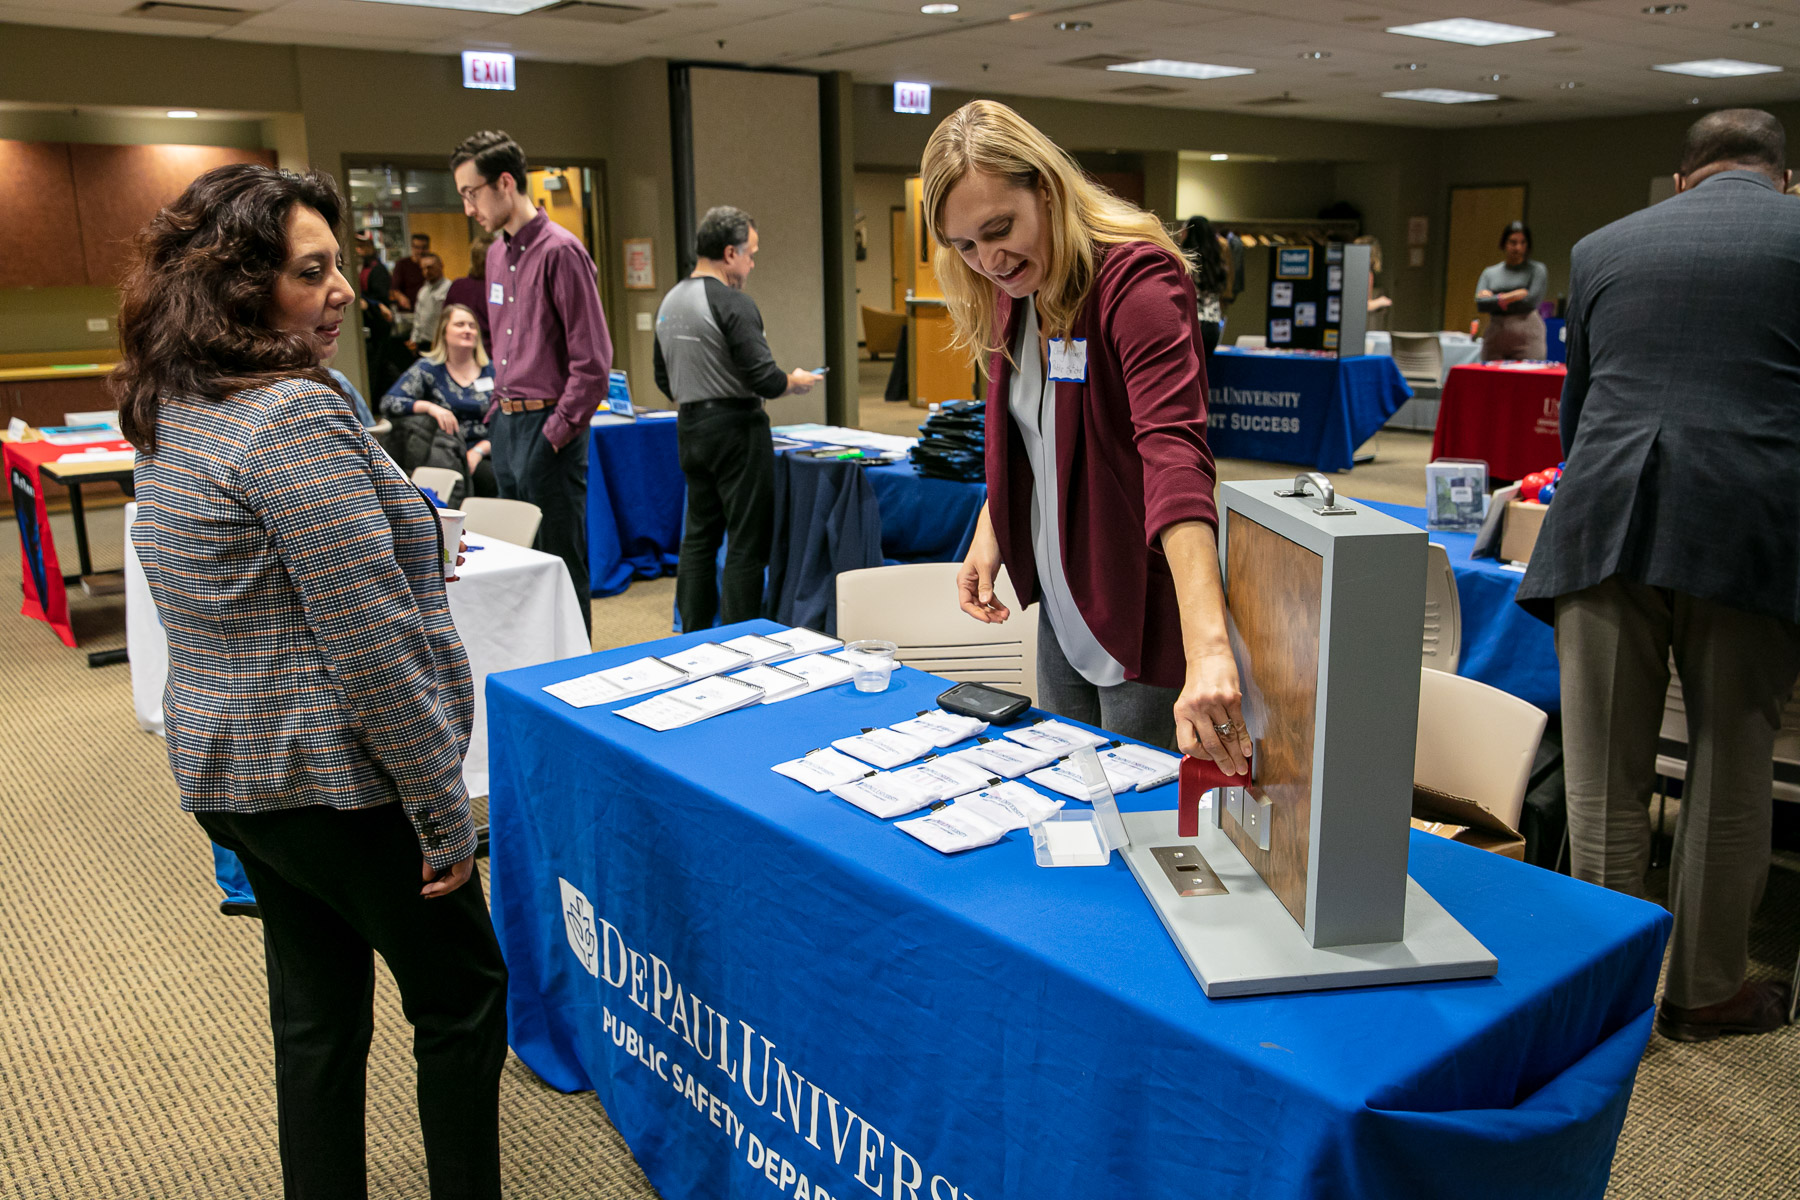 Cheryl Hover, associate director of emergency management in Facility Operations and Public Safety, demonstrates the proper use of the Nightlock Lockdown door stopper in classrooms during the Adjunct Faculty Resource Fair. (DePaul University/Randall Spriggs)